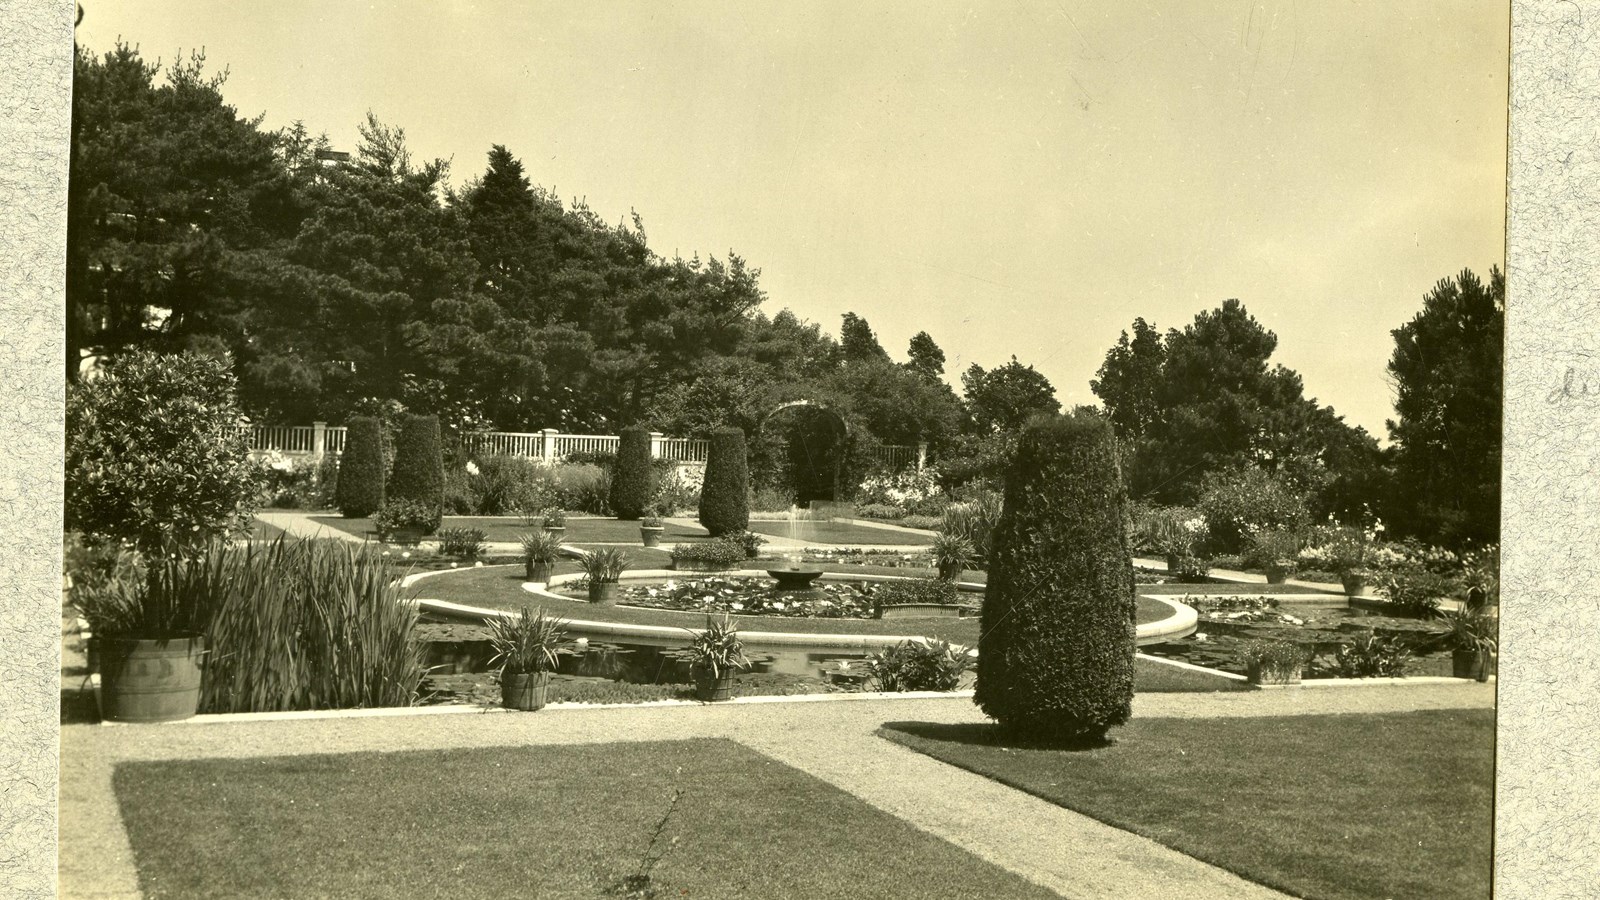 Black and white of flat grassy area with plants and flowers along paths, fountain in middle